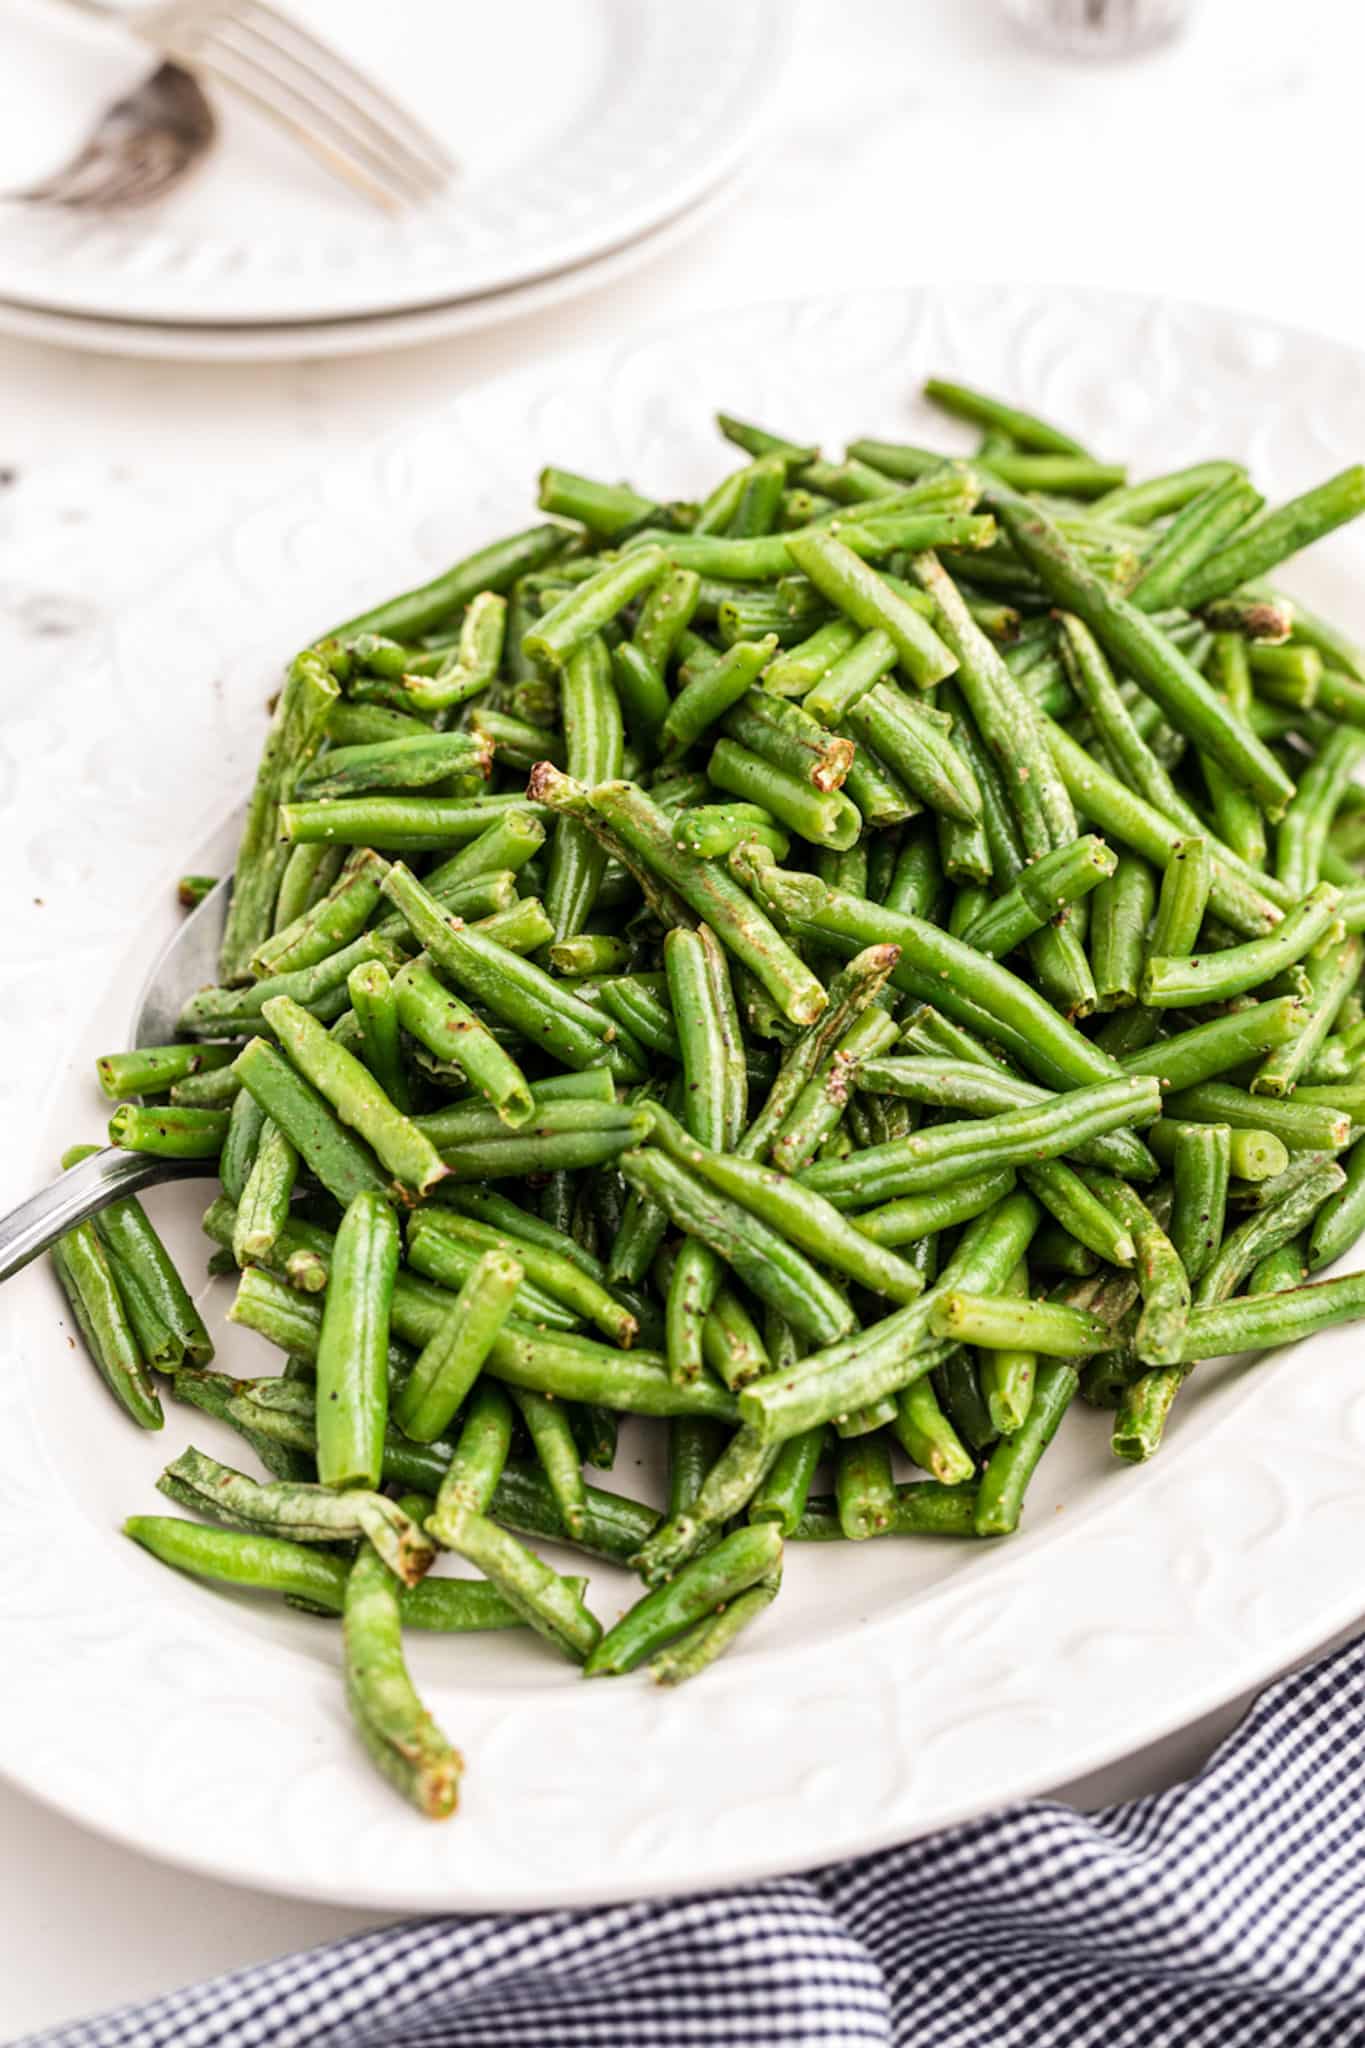 https://www.cleaneatingkitchen.com/wp-content/uploads/2021/11/air-fryer-frozen-cooked-green-beans-hero-scaled.jpg